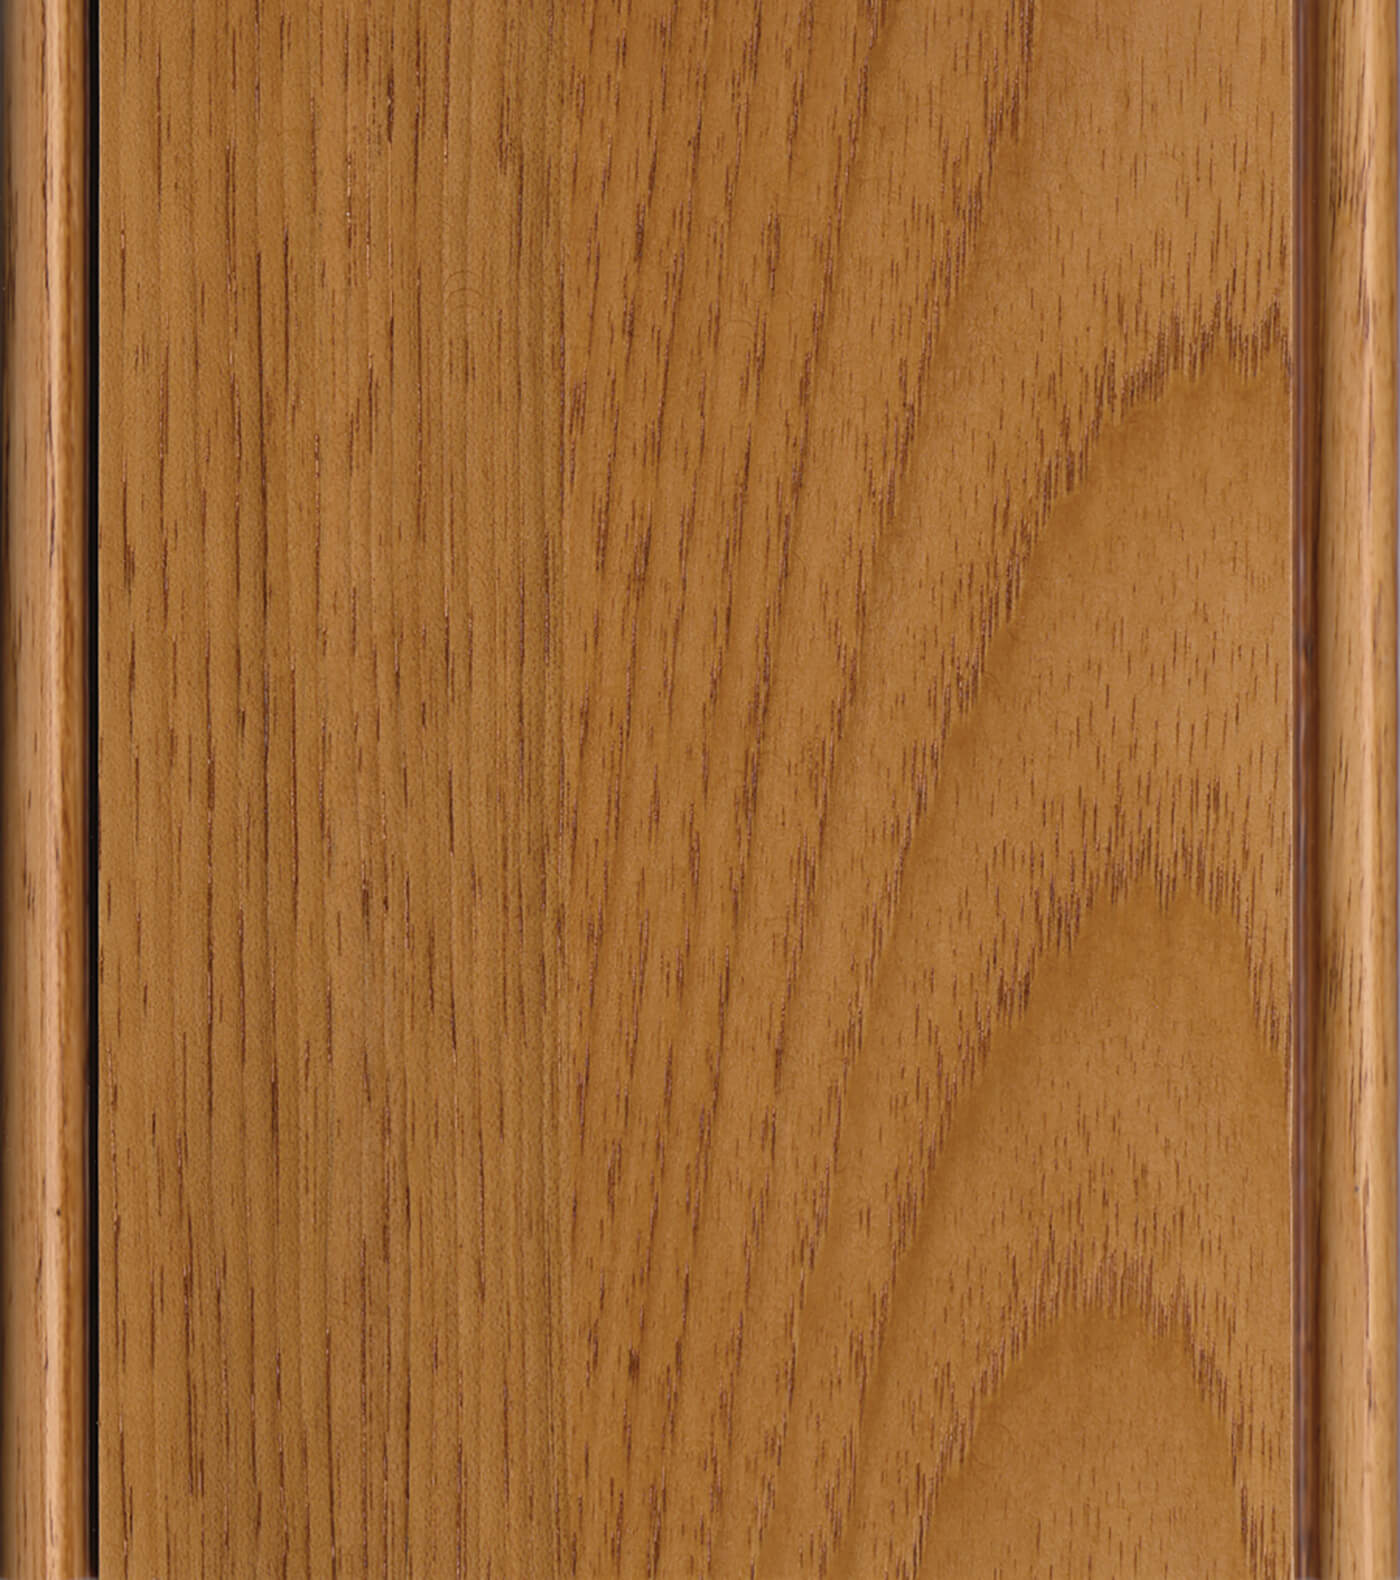 Butternut Stain on Hickory or Rustic Hickory